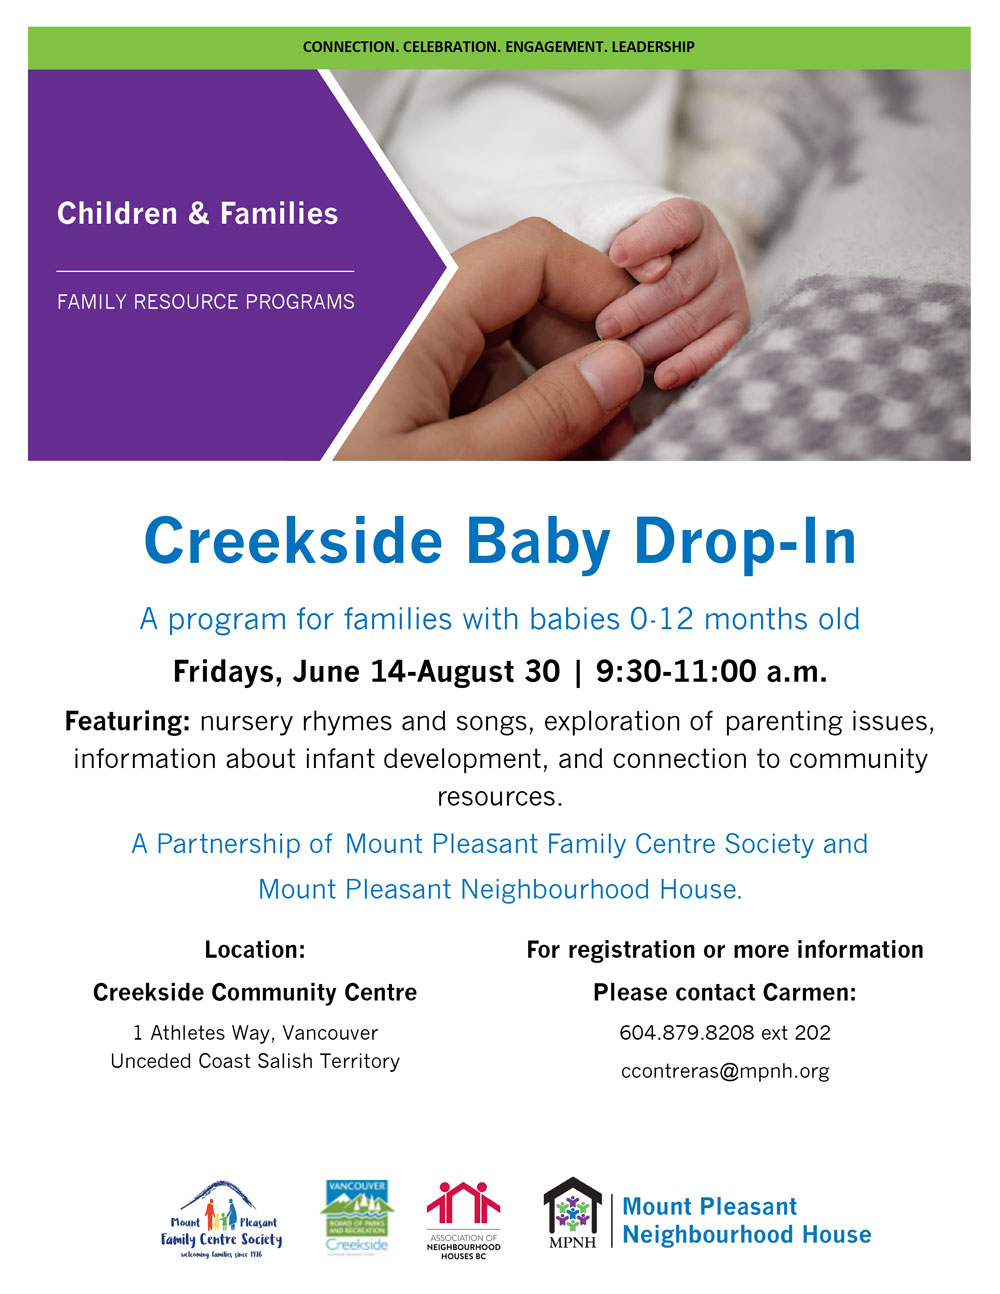 An image of the poster with program details, featuring a photo of an adult's hand holding a baby's hand